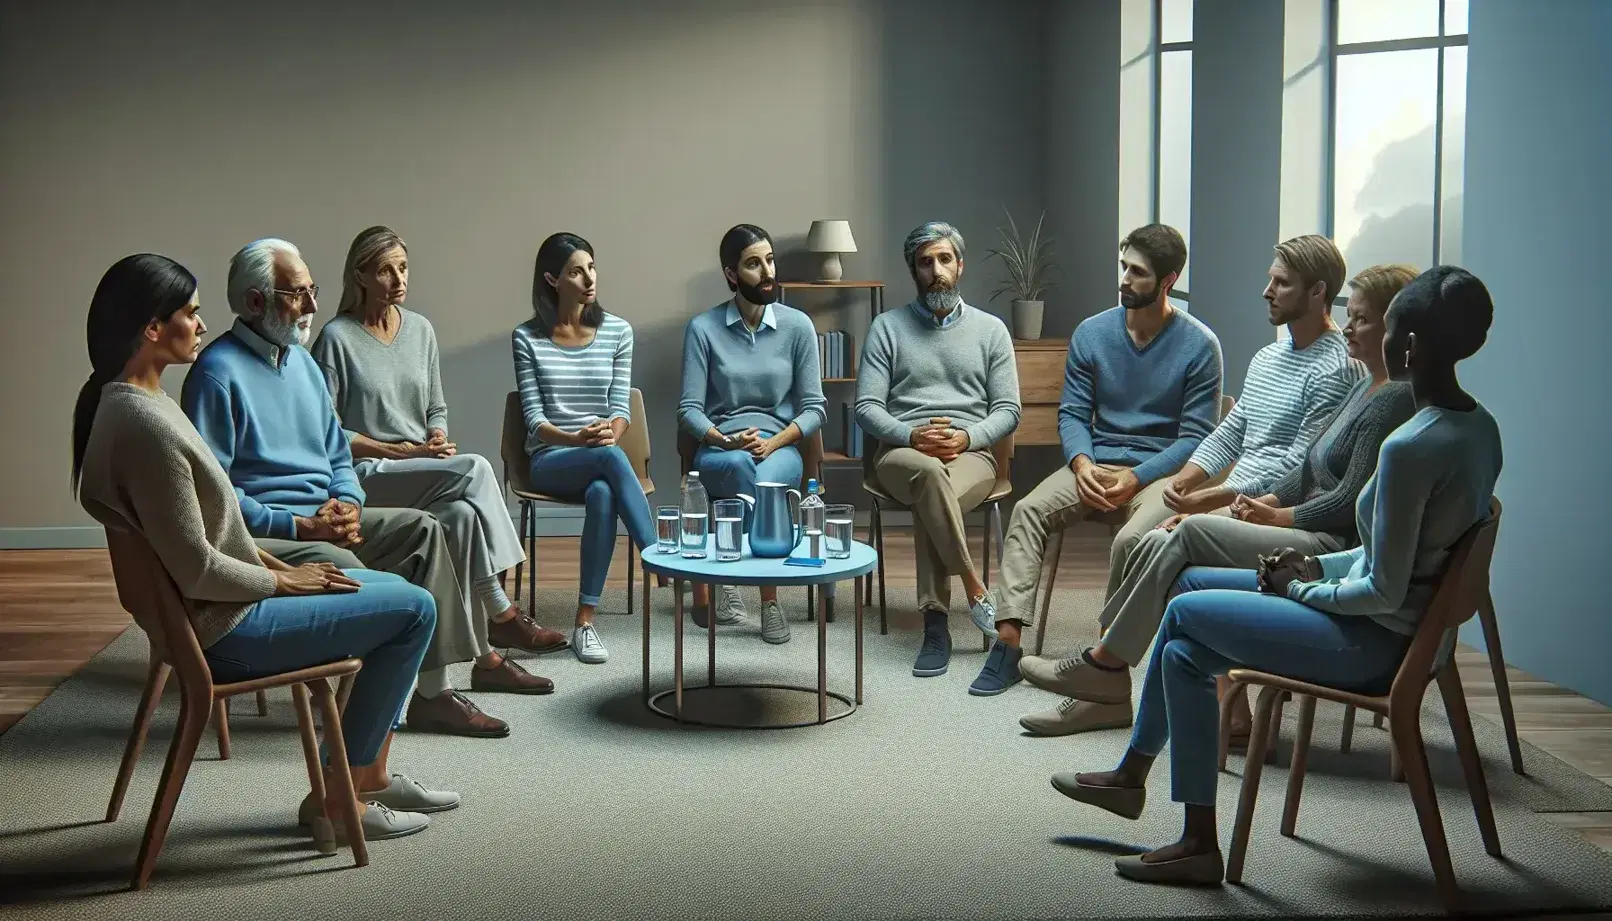 Diverse group sitting in a semi-circle in a support meeting, expressions varying from contemplative to empathetic, welcoming environment with table and water.